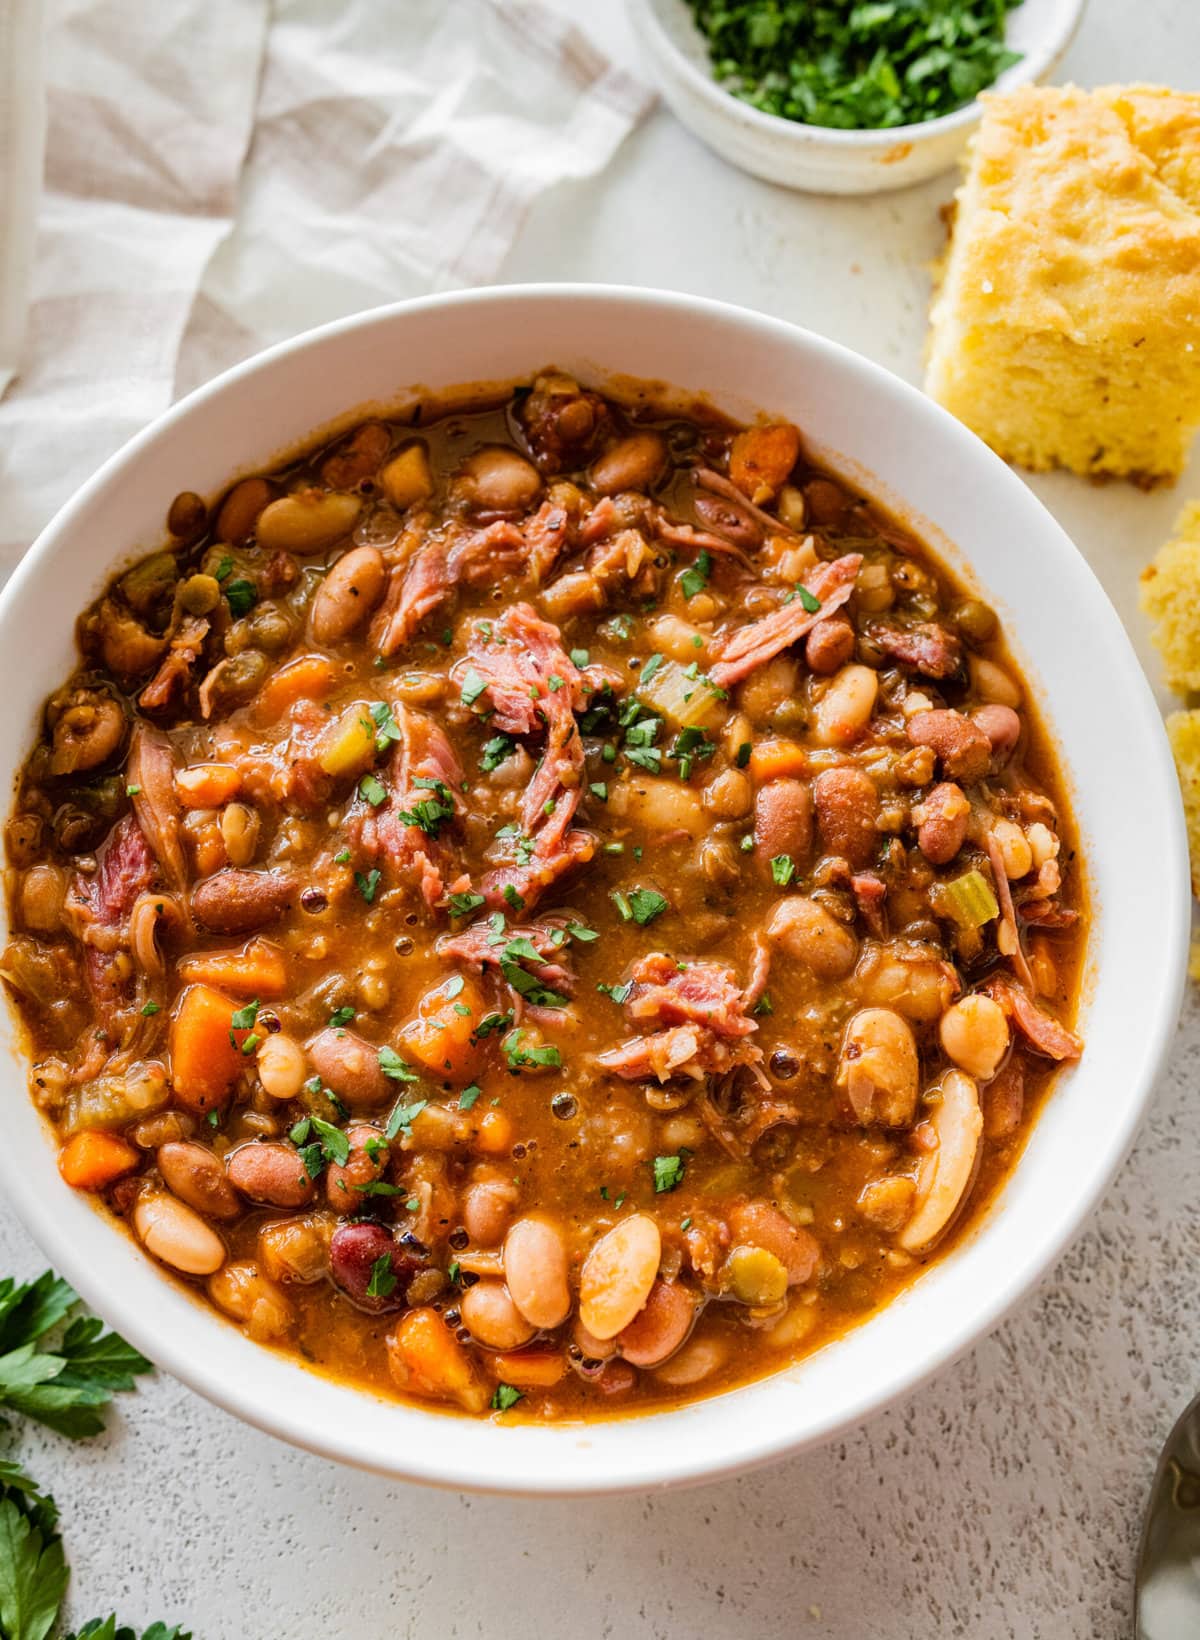 15 bean soup mix recipe in a white bowl with slices of cornbread on the side.